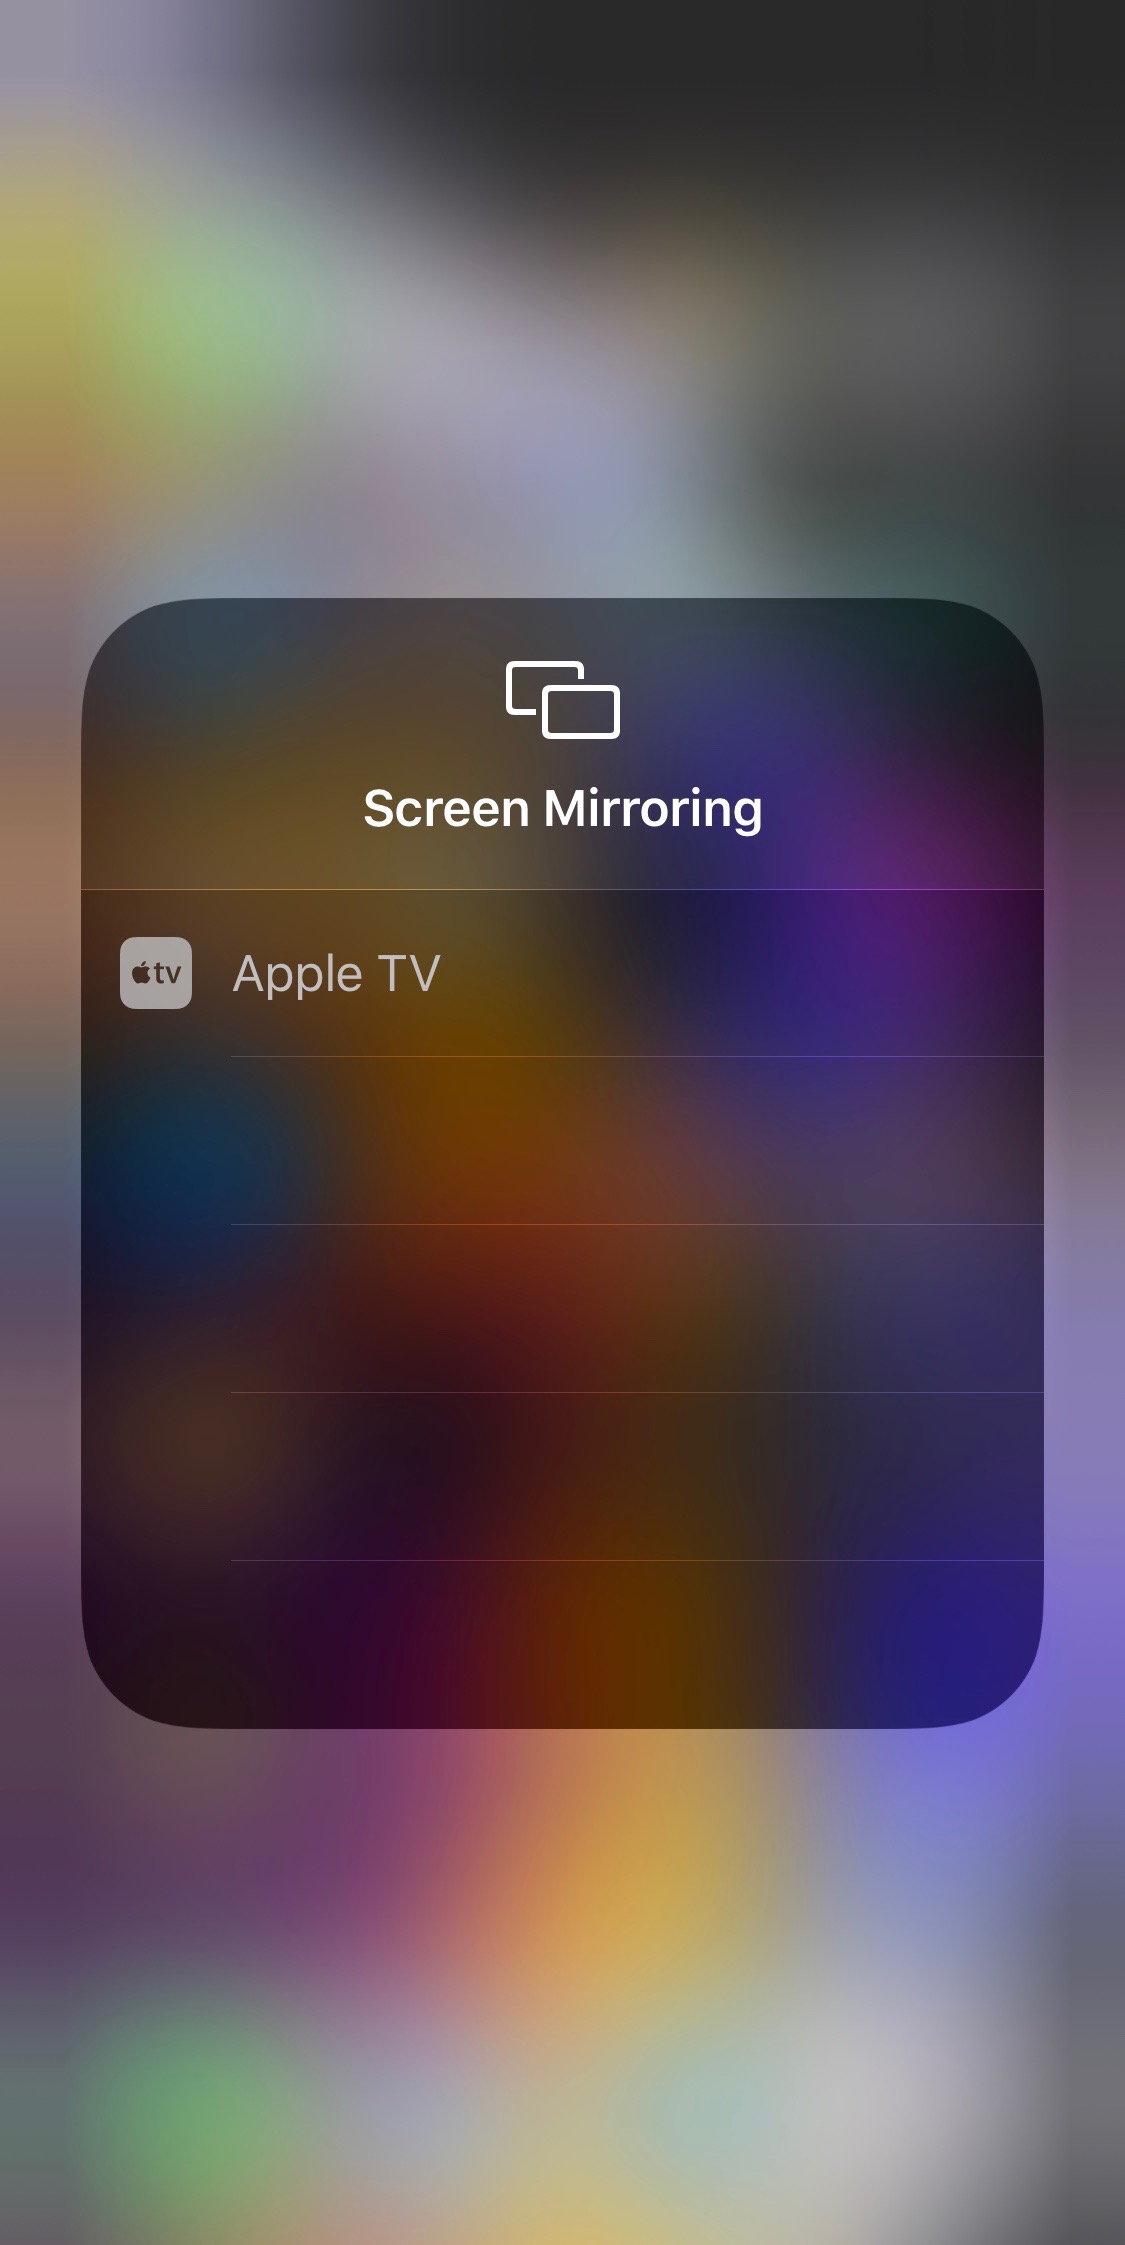 We Cannot Turn Off Screen Mirroring On, How Do I Turn Off Screen Mirroring On My Ipad